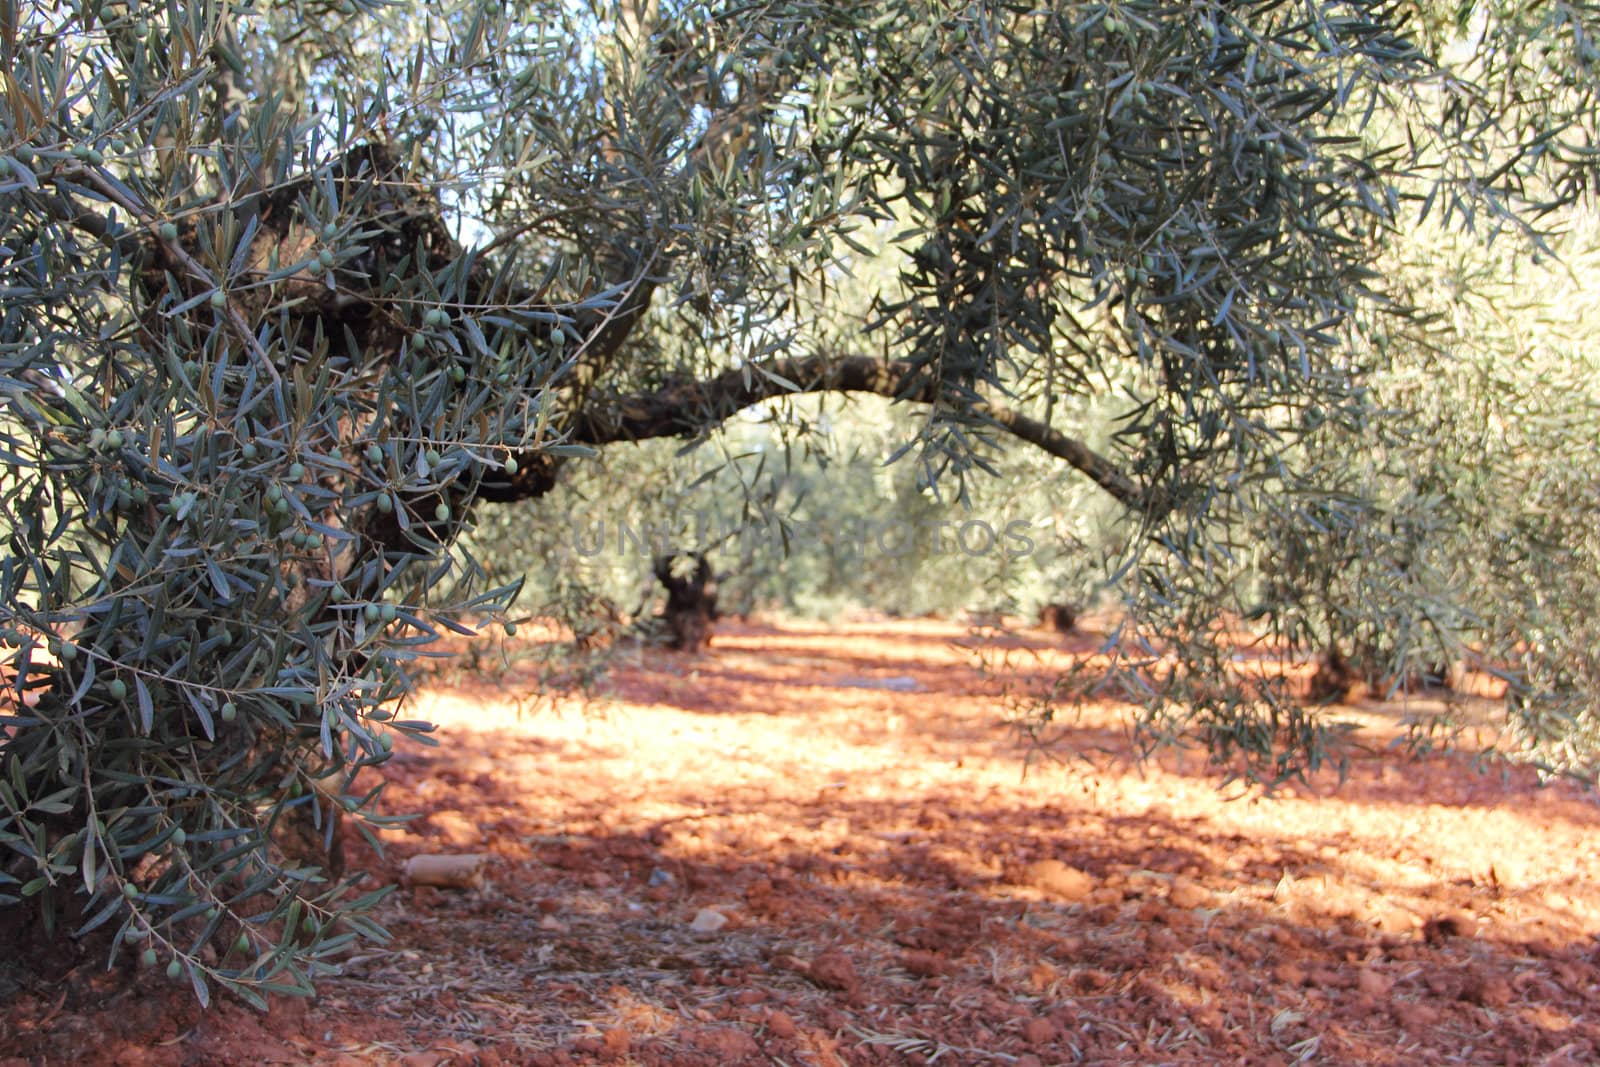 Beautiful olive trees in garden with red soil